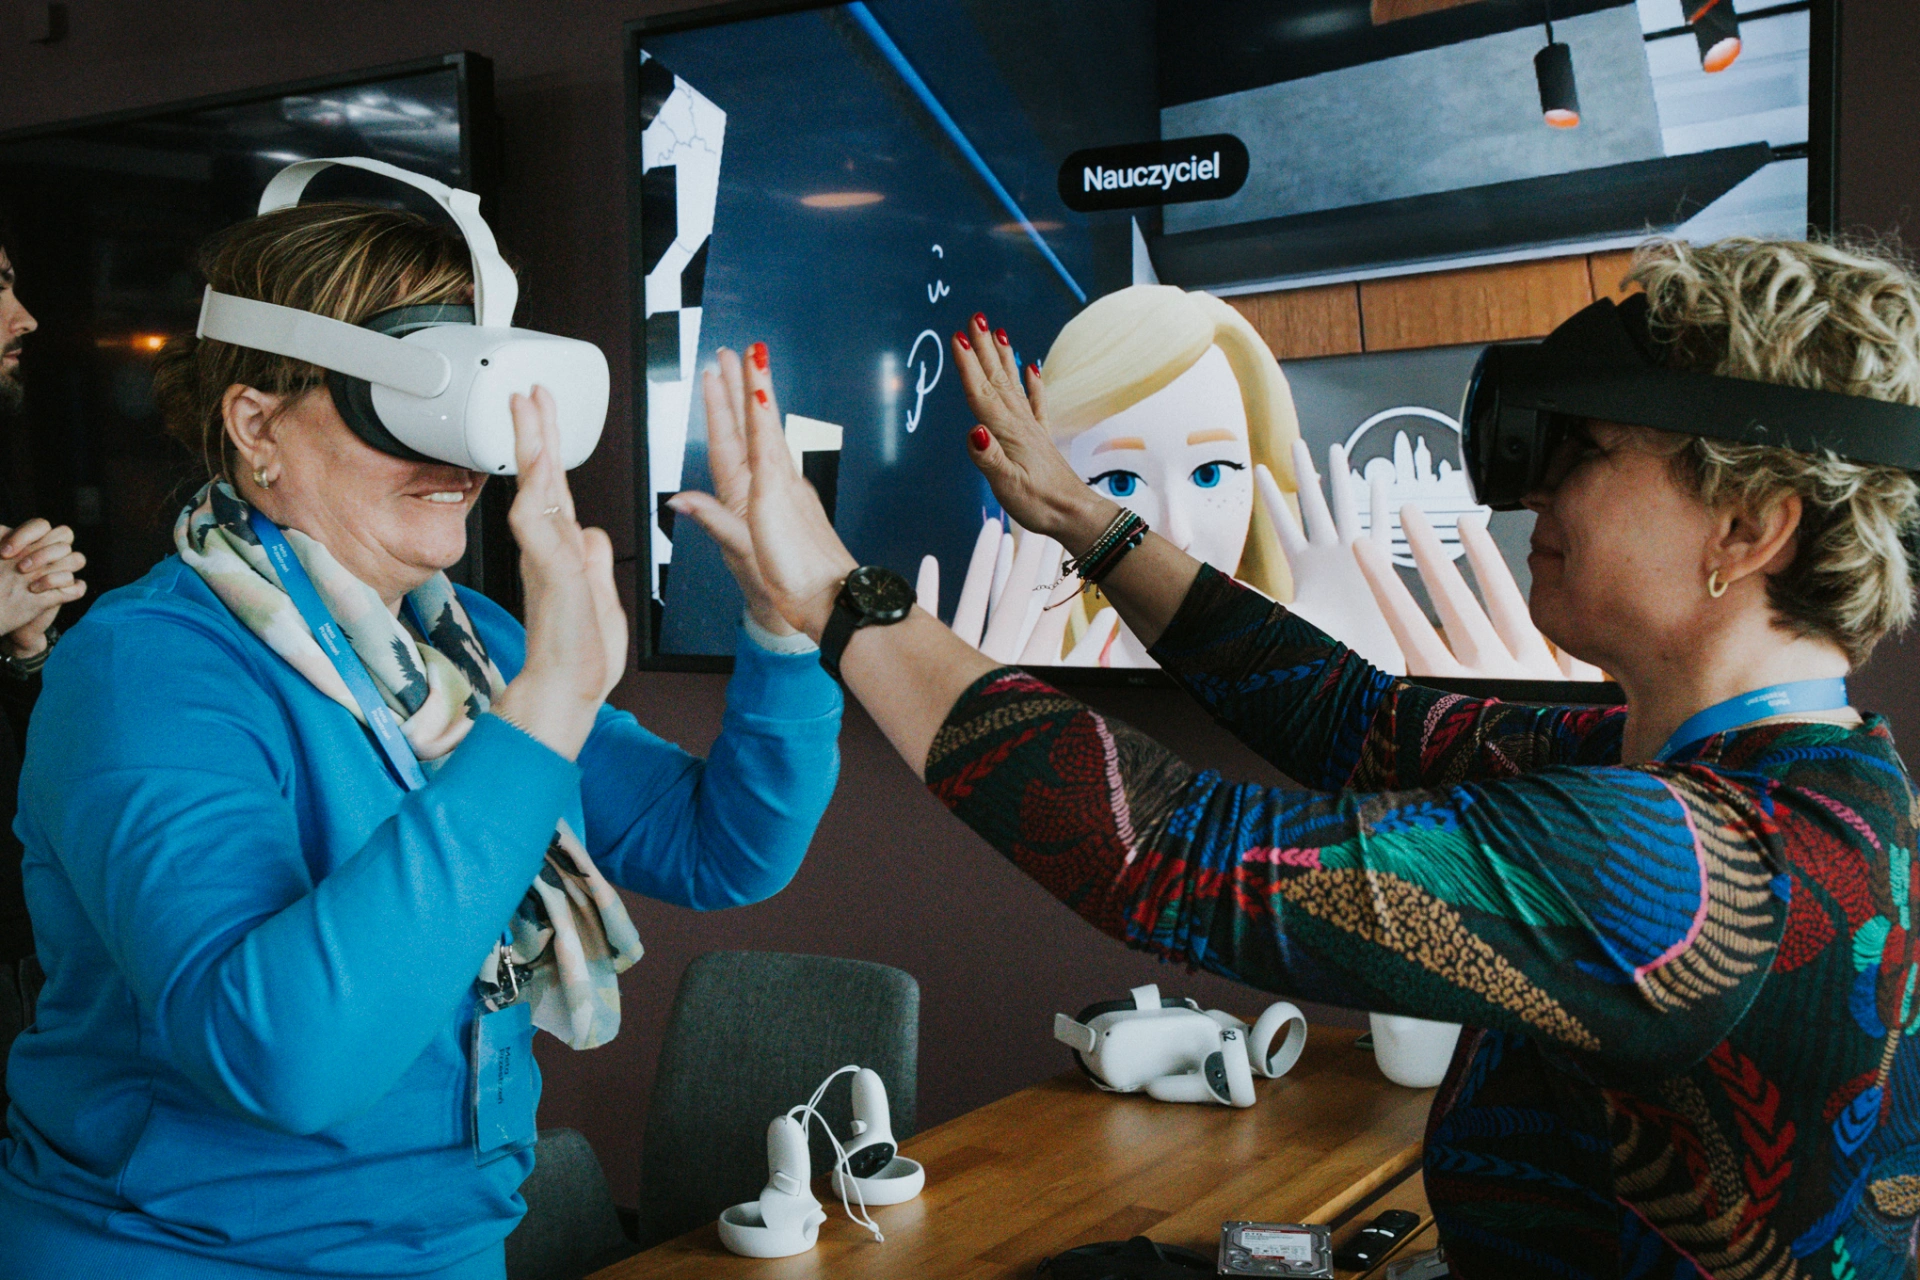 AR and VR in classrooms: Poland Promotes Innovative Education